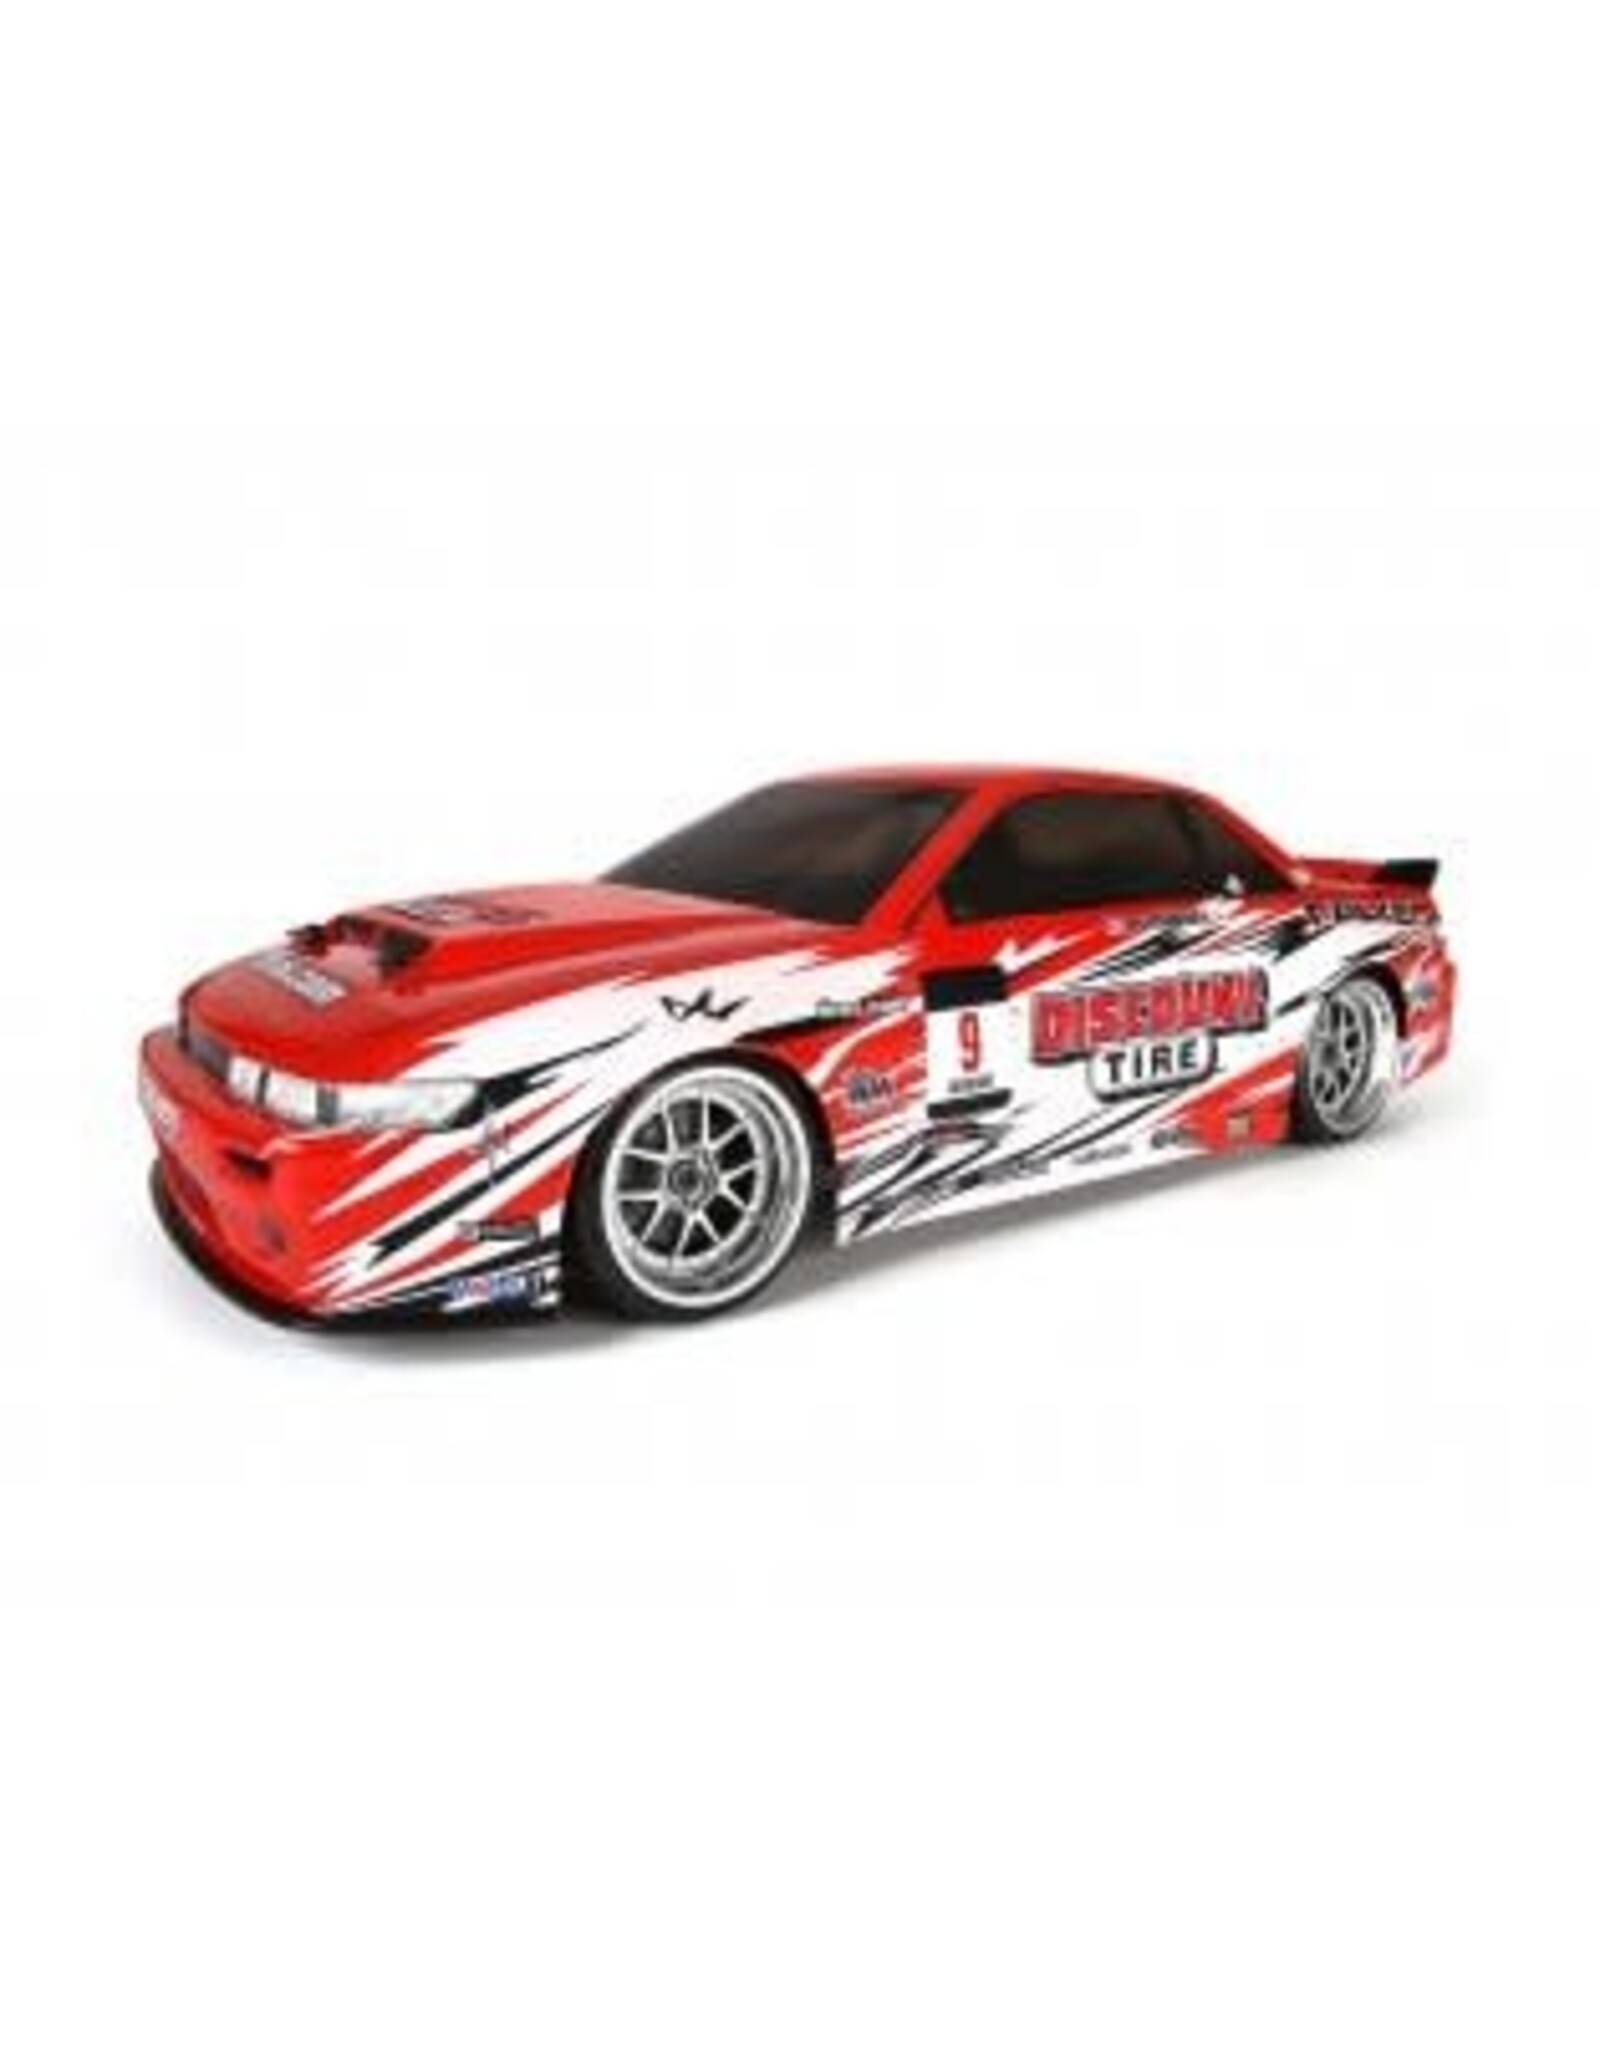 HPI Racing Nissan S13 Body, for the E10 Drift (200mm)